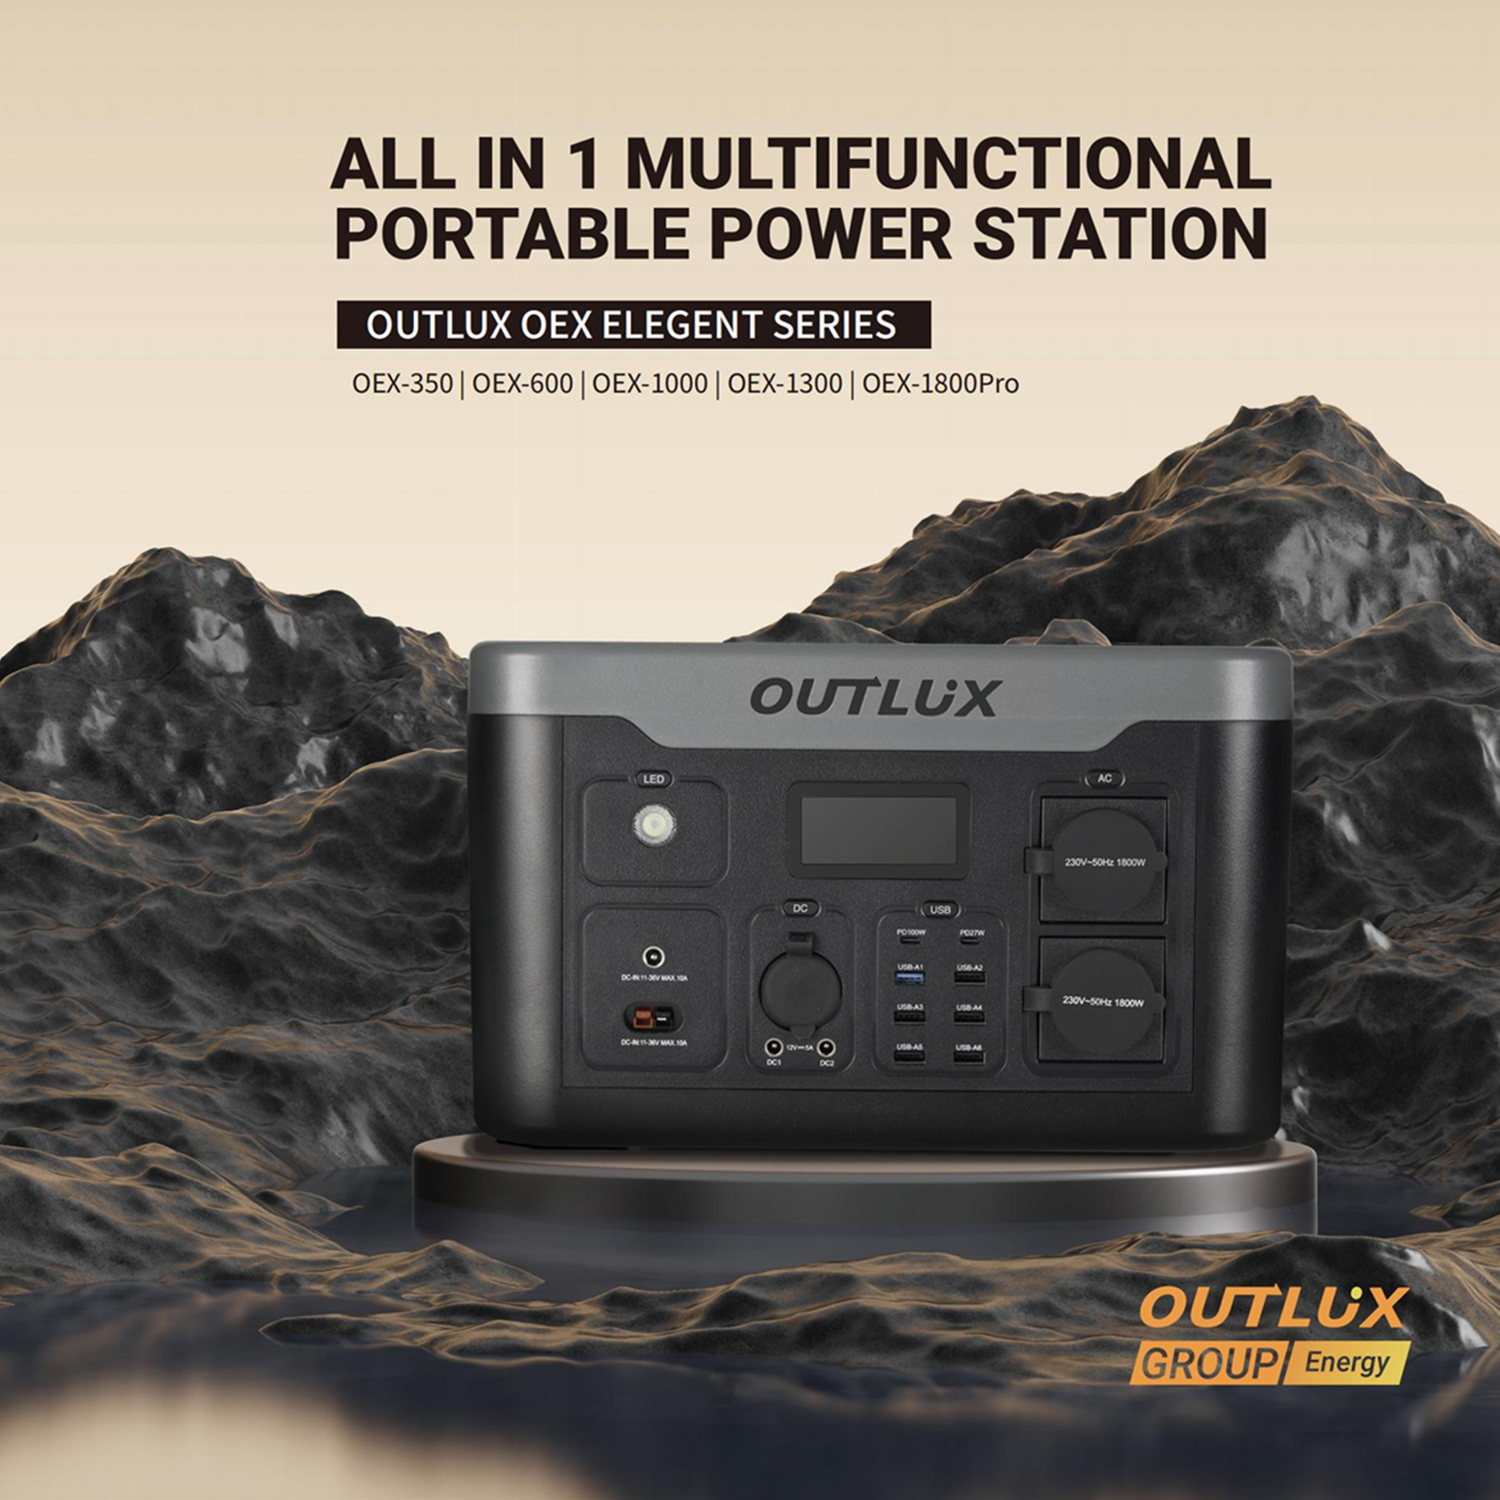 Outlux 600w Portable Power Station-Multifunctional